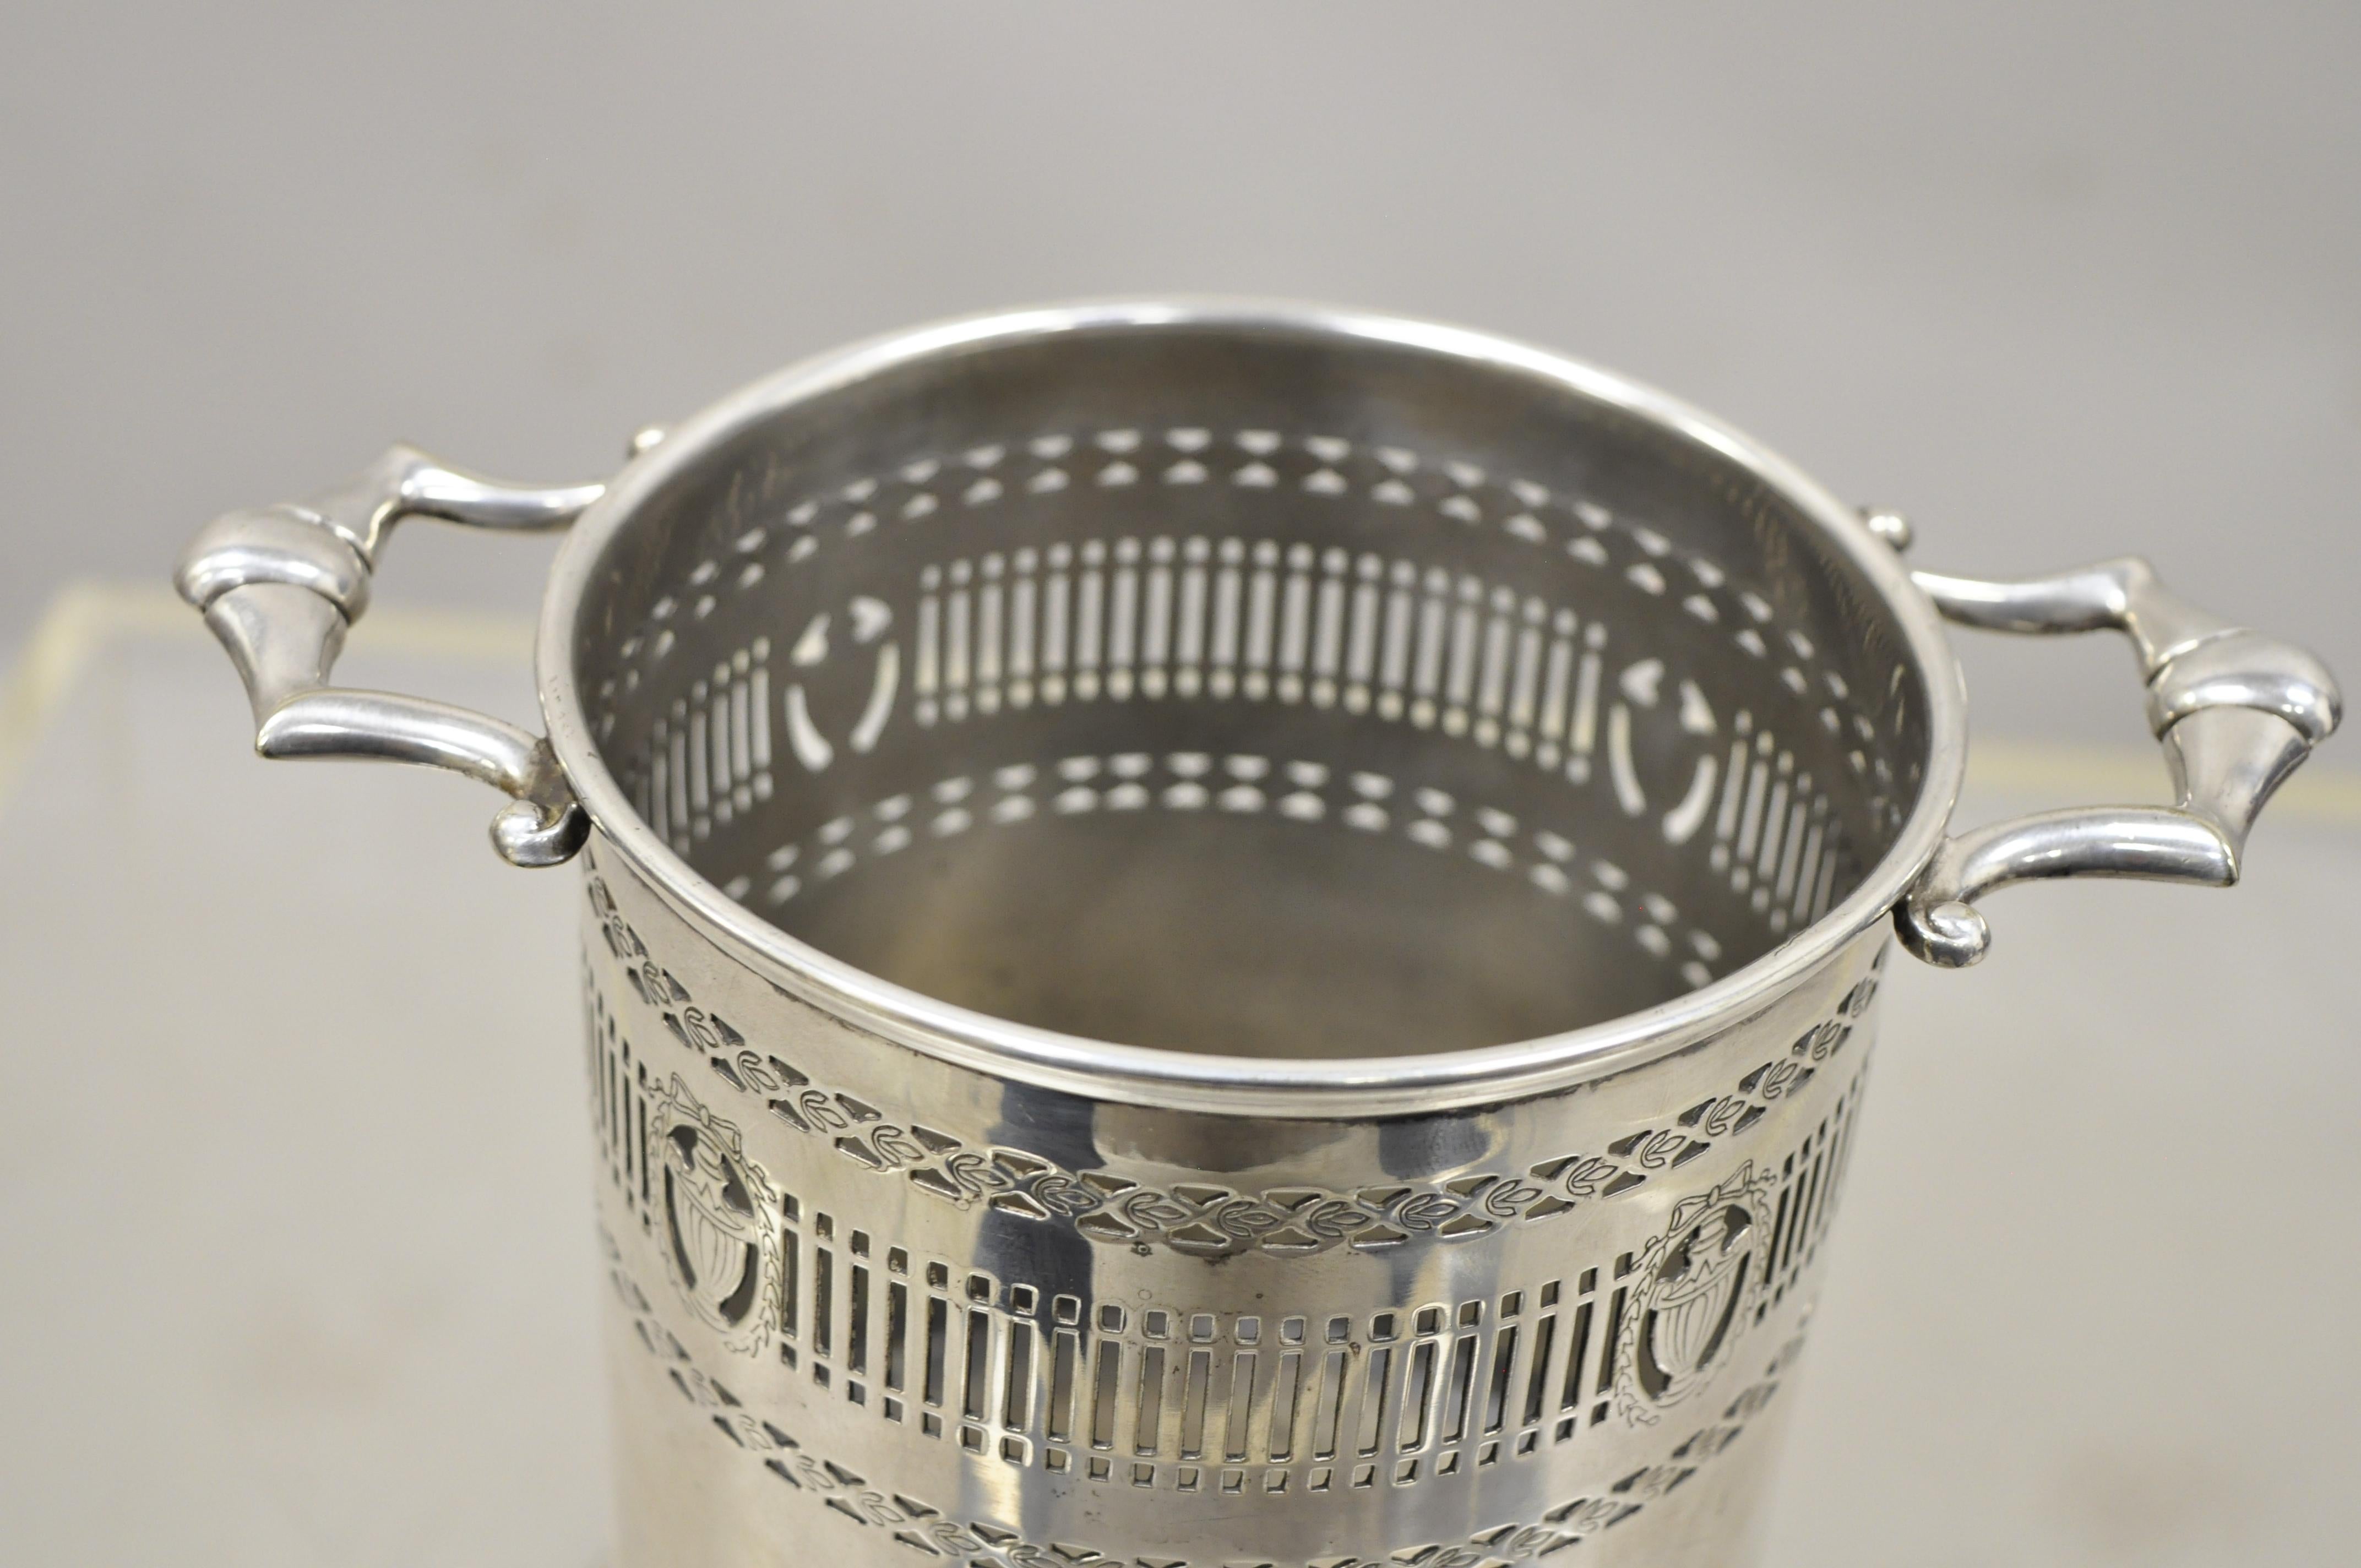 Vintage English Regency Adams style silver plate wine bucket holder coaster chiller with urns. Item features pierce decorated with urns, wreath, and bows, twin handles, very nice antique item, circa early 20th century. Measurements: 6.25